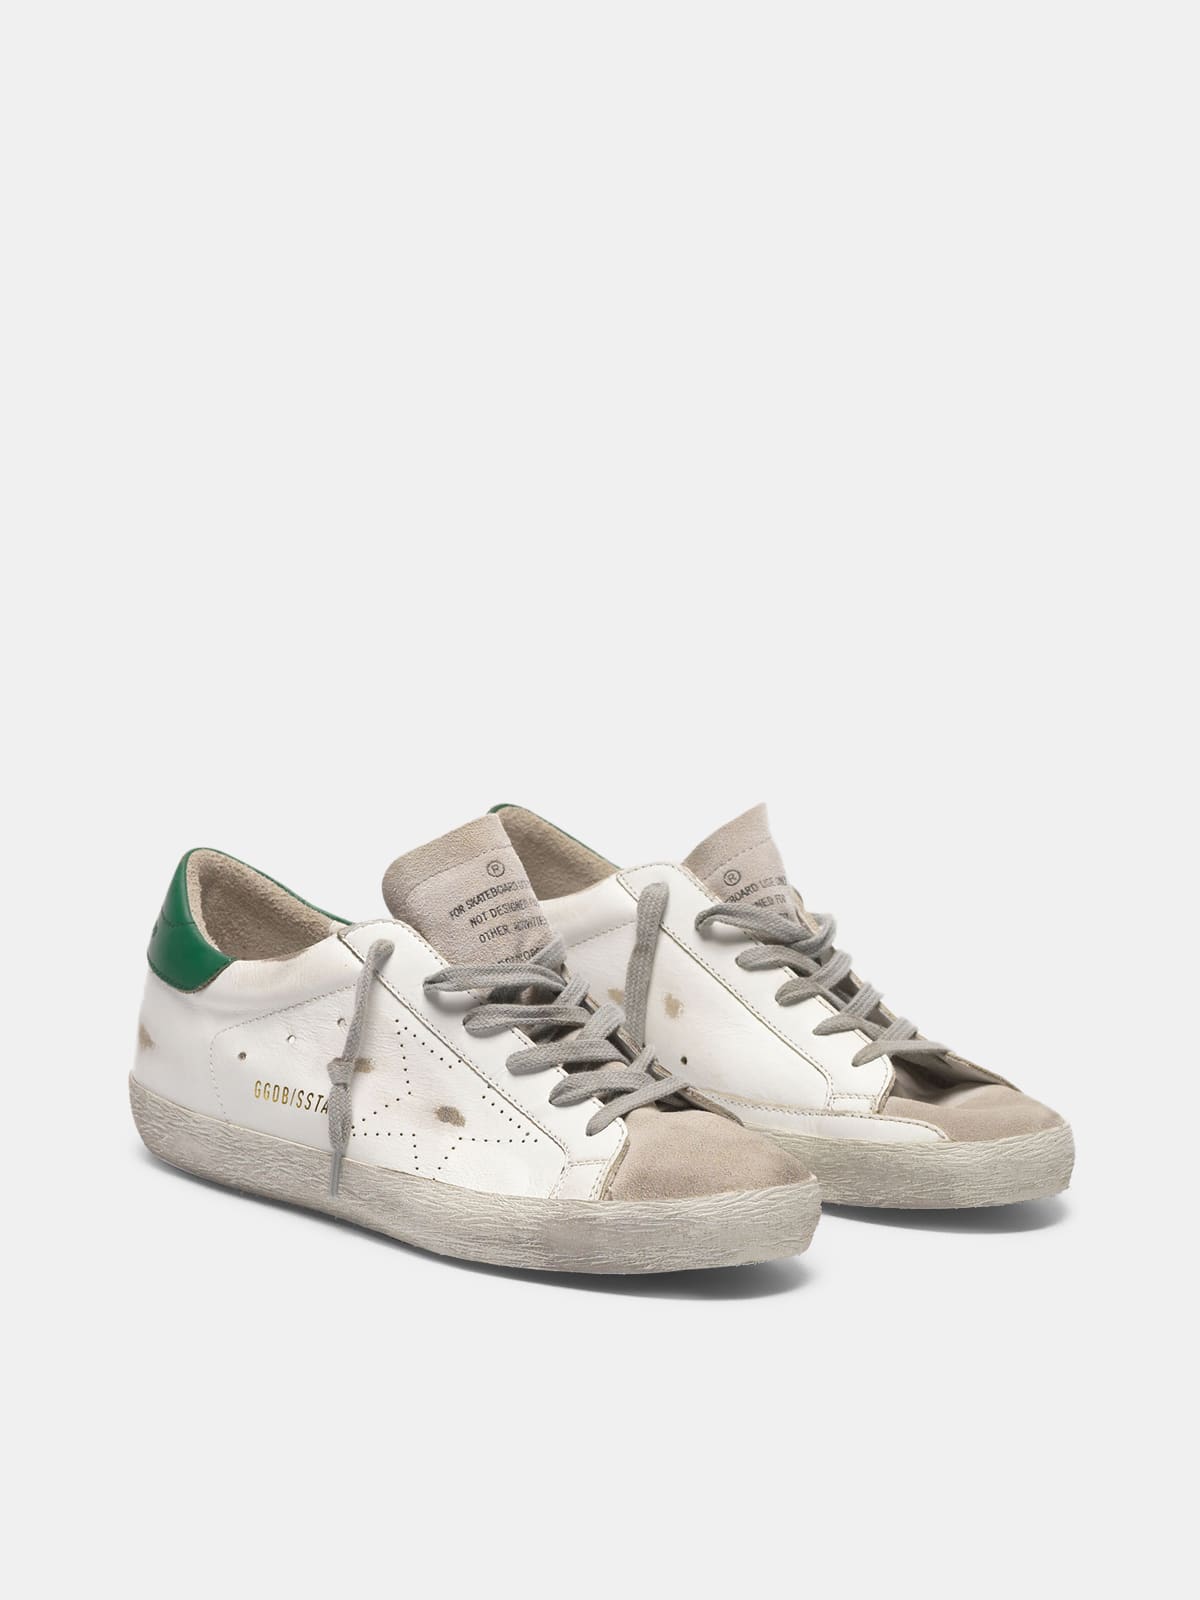 GOLDEN GOOSE Super-Star sneakers white leather-green heel tab 